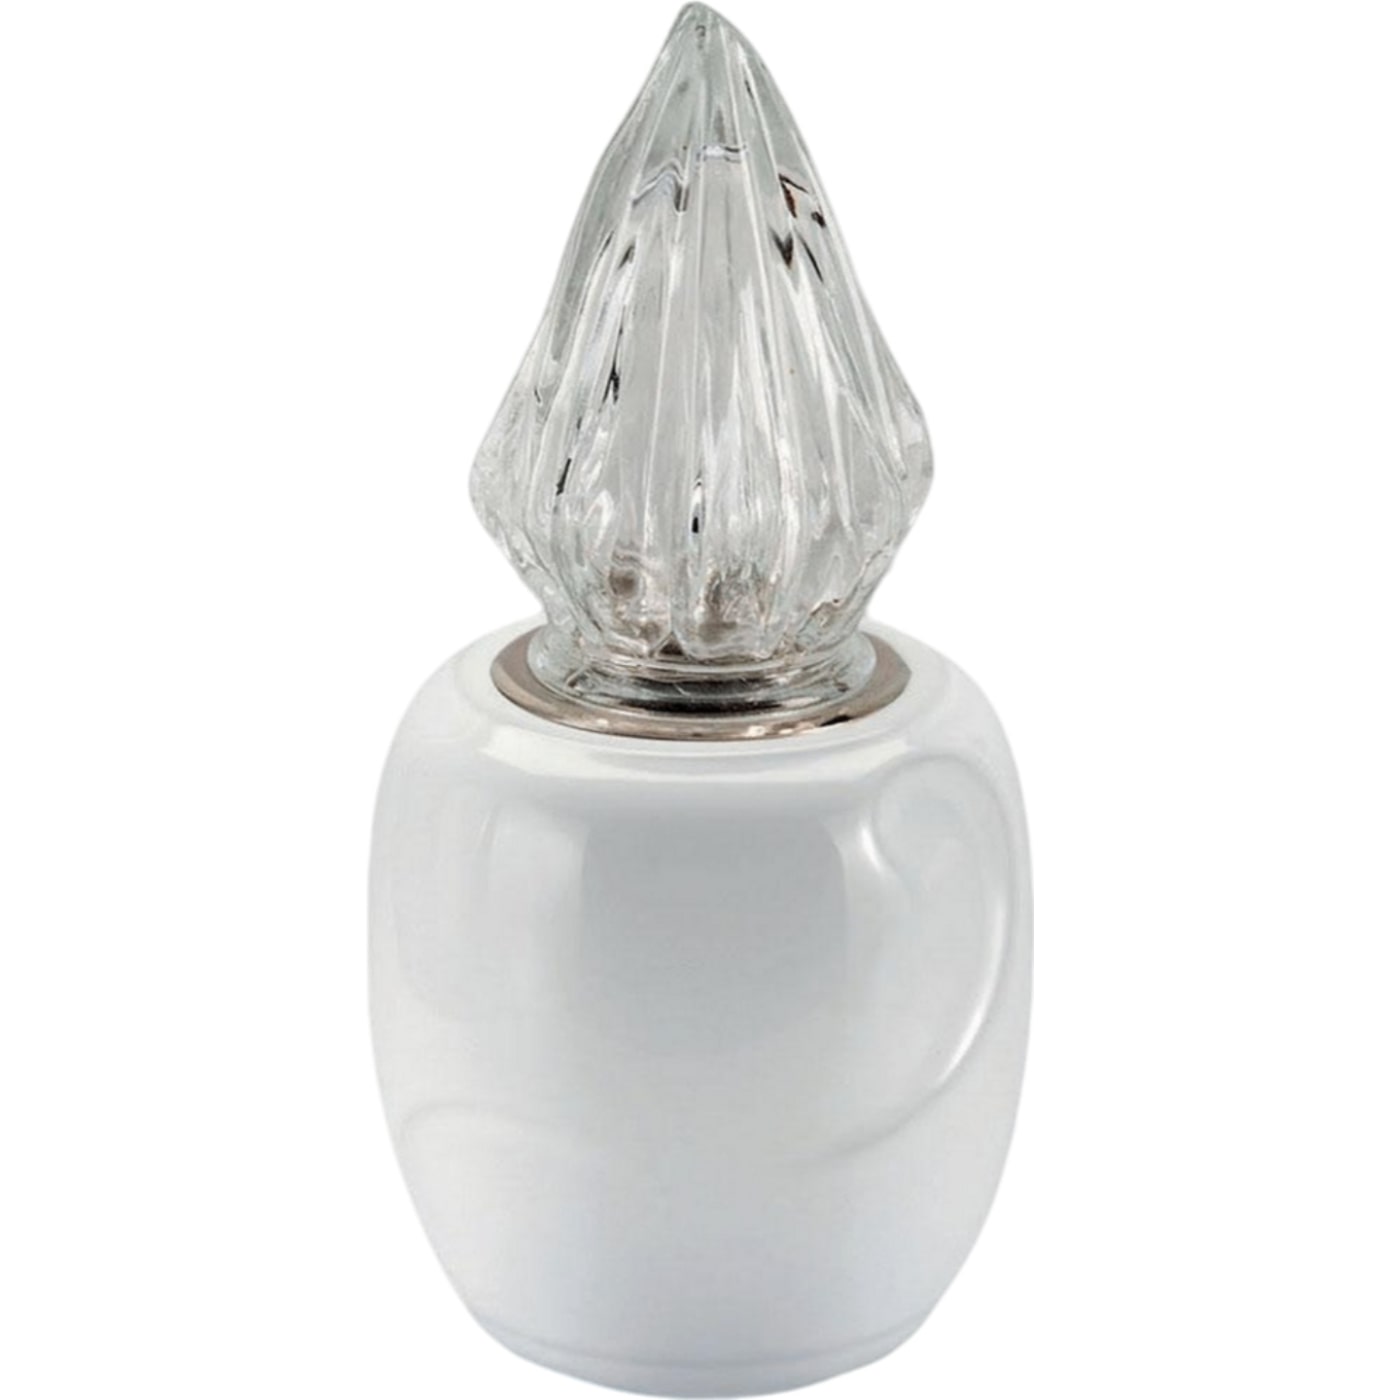 Grave light Sharon 10x10cm - 3.9x3.9in In white porcelain, ground attached SH126T